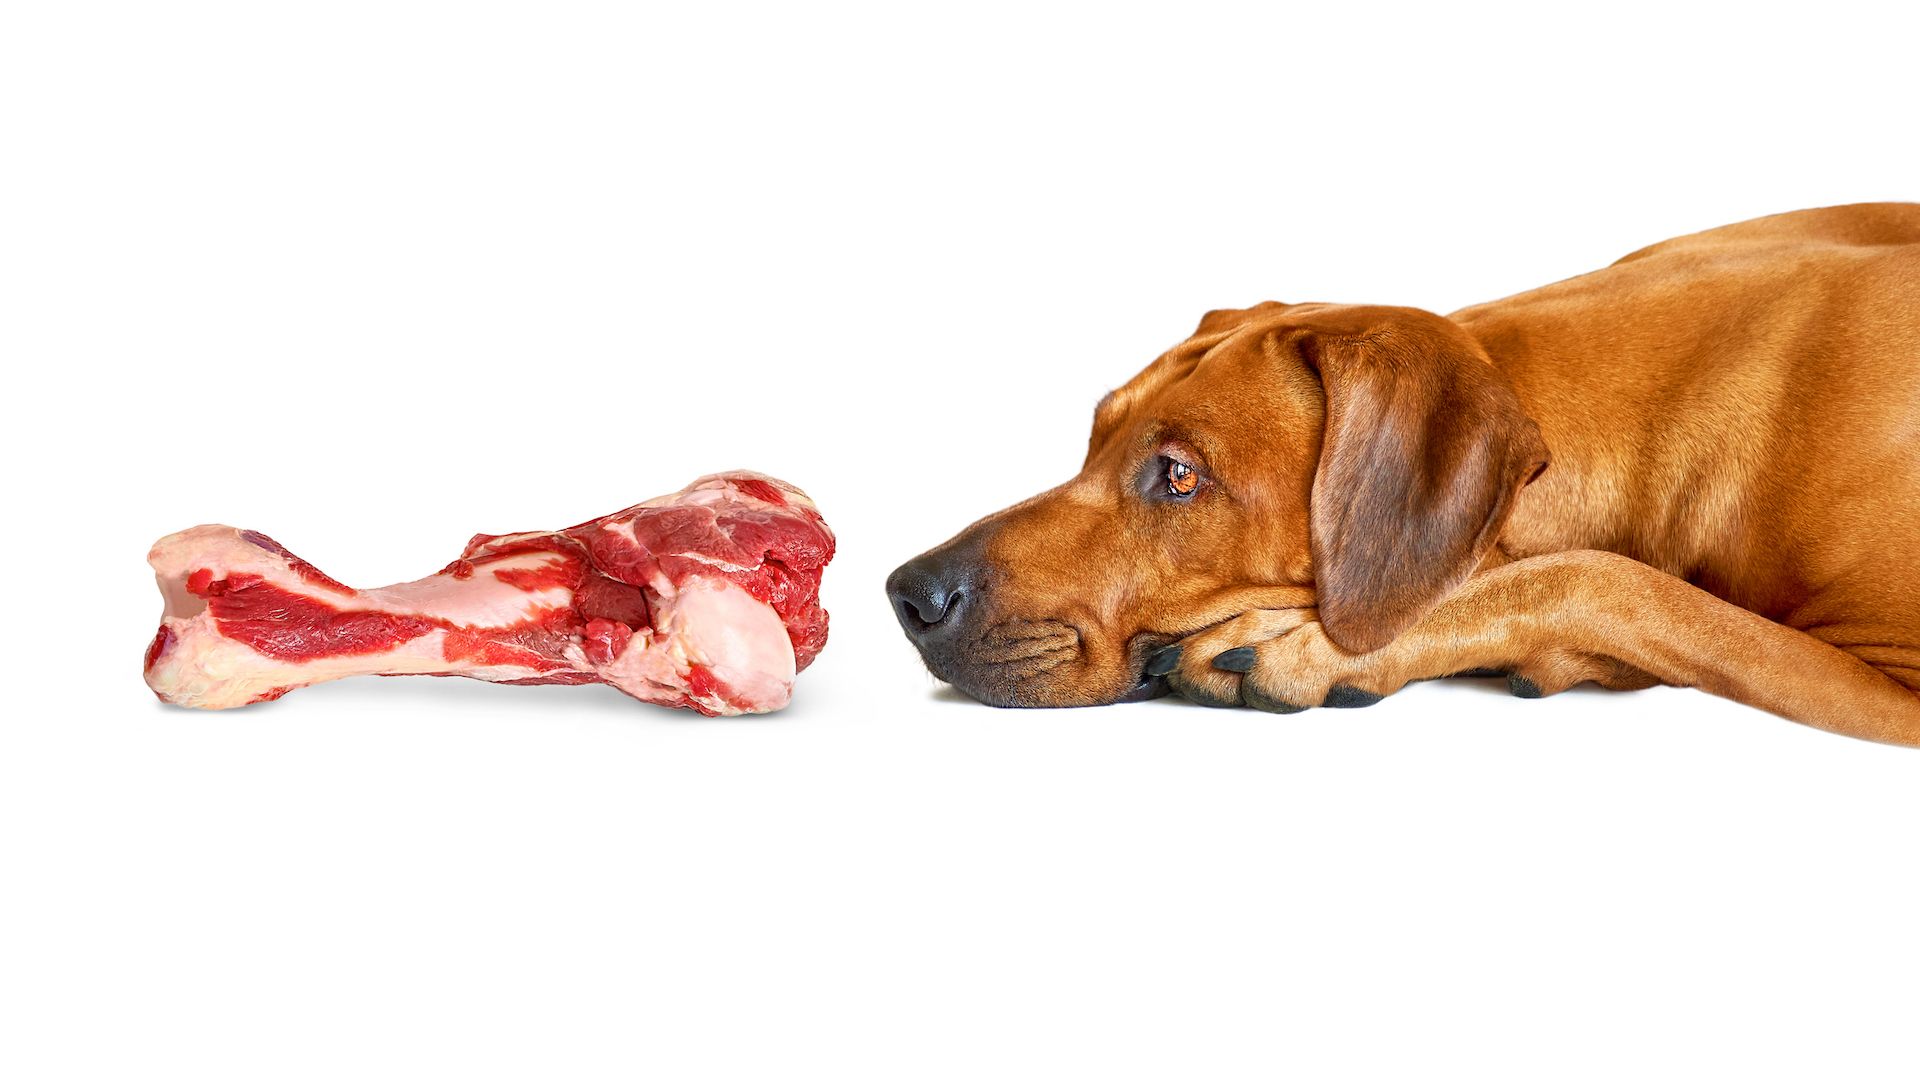 <p>                     Dogs require a diet that is rich in meat, which is a) expensive; and b) against some people’s values. Over nine million Americans are vegetarian, a growing number, and some of these do not like to handle meat, even if they are not going to eat it themselves. Plant-based diets are available for dogs, but these are rare and the <a href="https://www.bva.co.uk/" rel="nofollow">British Veterinary Association</a> does not recommend giving a dog a vegetarian or vegan diet as it’s tricky to get the correct nutrient balance, and there is insufficient scientific evidence currently to promote it.                   </p>